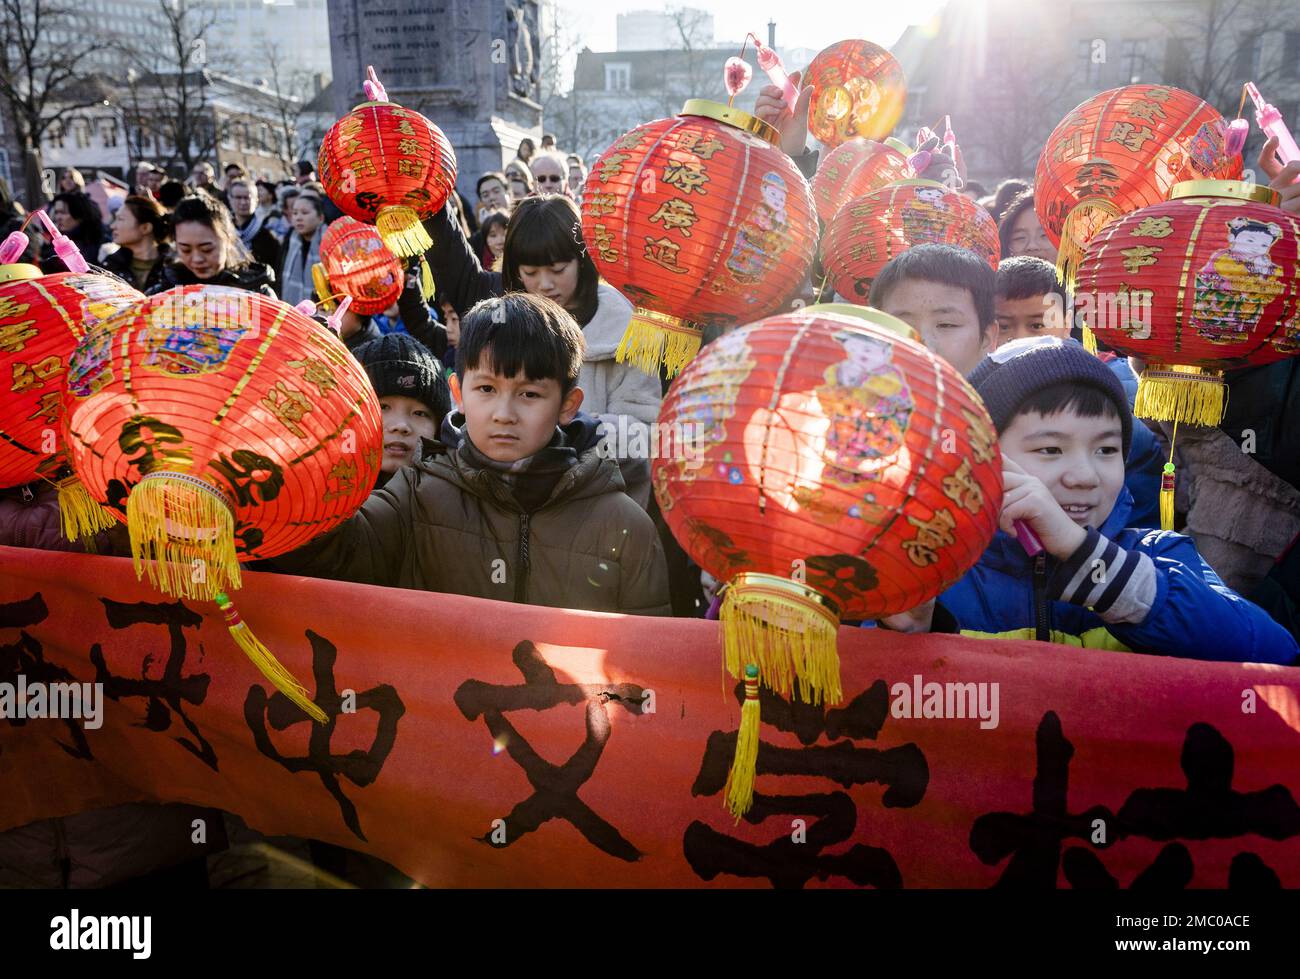 THE HAGUE - A parade during the national celebration of the Chinese New Year. According to the Chinese zodiac, the year 2023 is all about the Rabbit. ANP SEM VAN DER WAL netherlands out - belgium out Credit: ANP/Alamy Live News Stock Photo